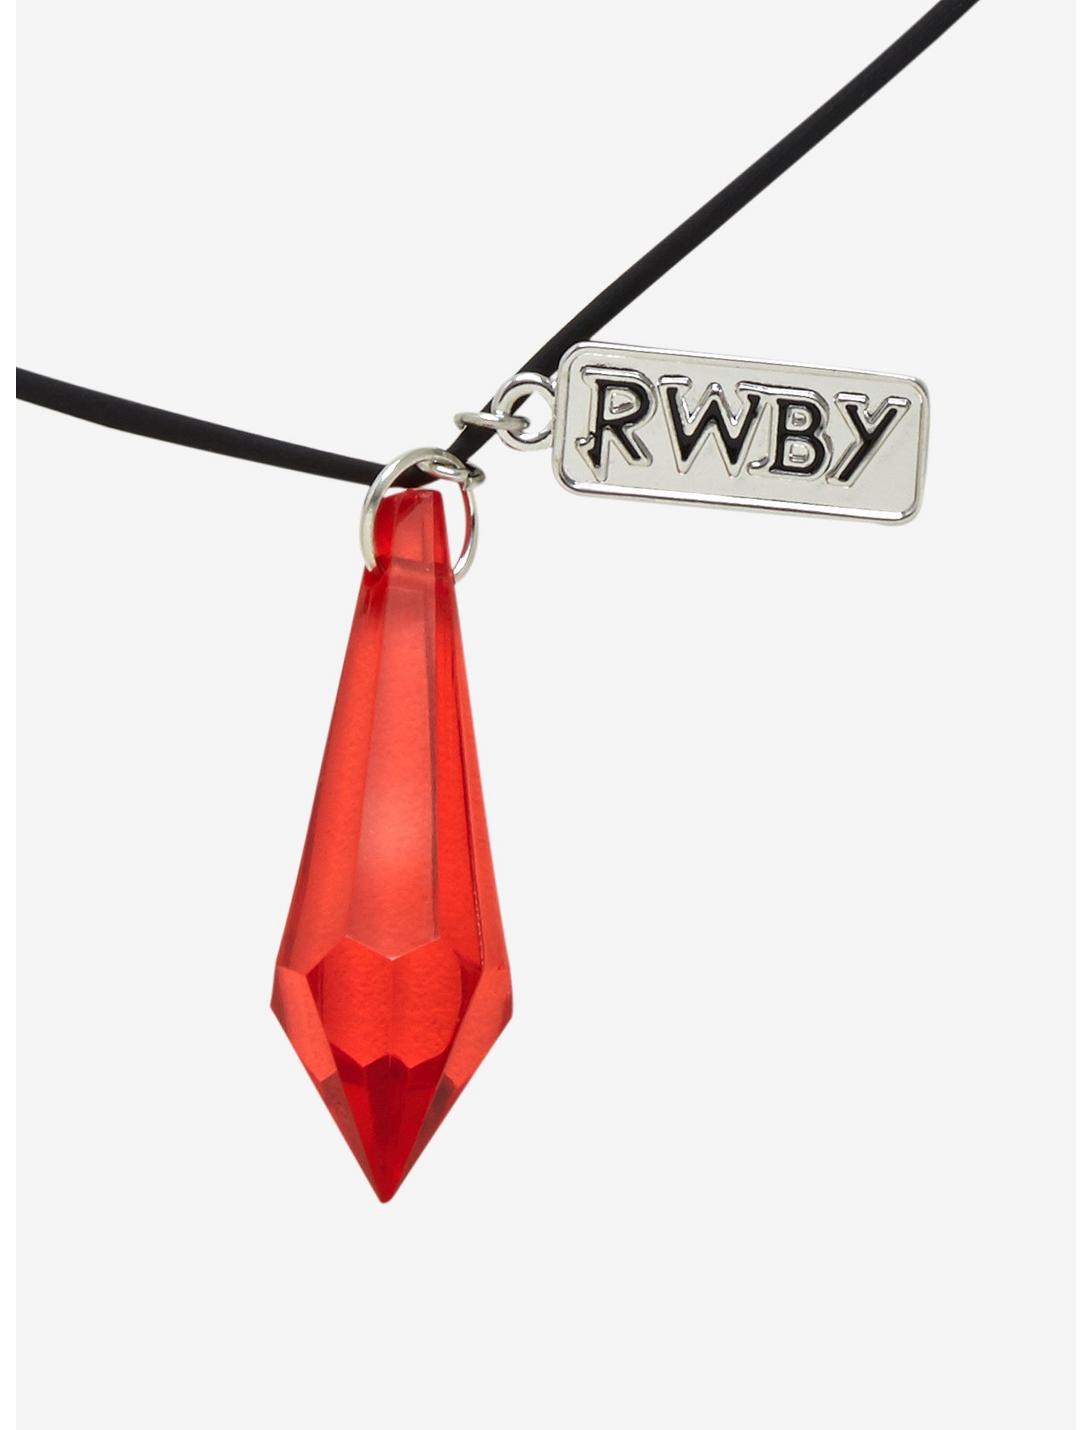 RWBY Red Dust Crystal Necklace, , hi-res